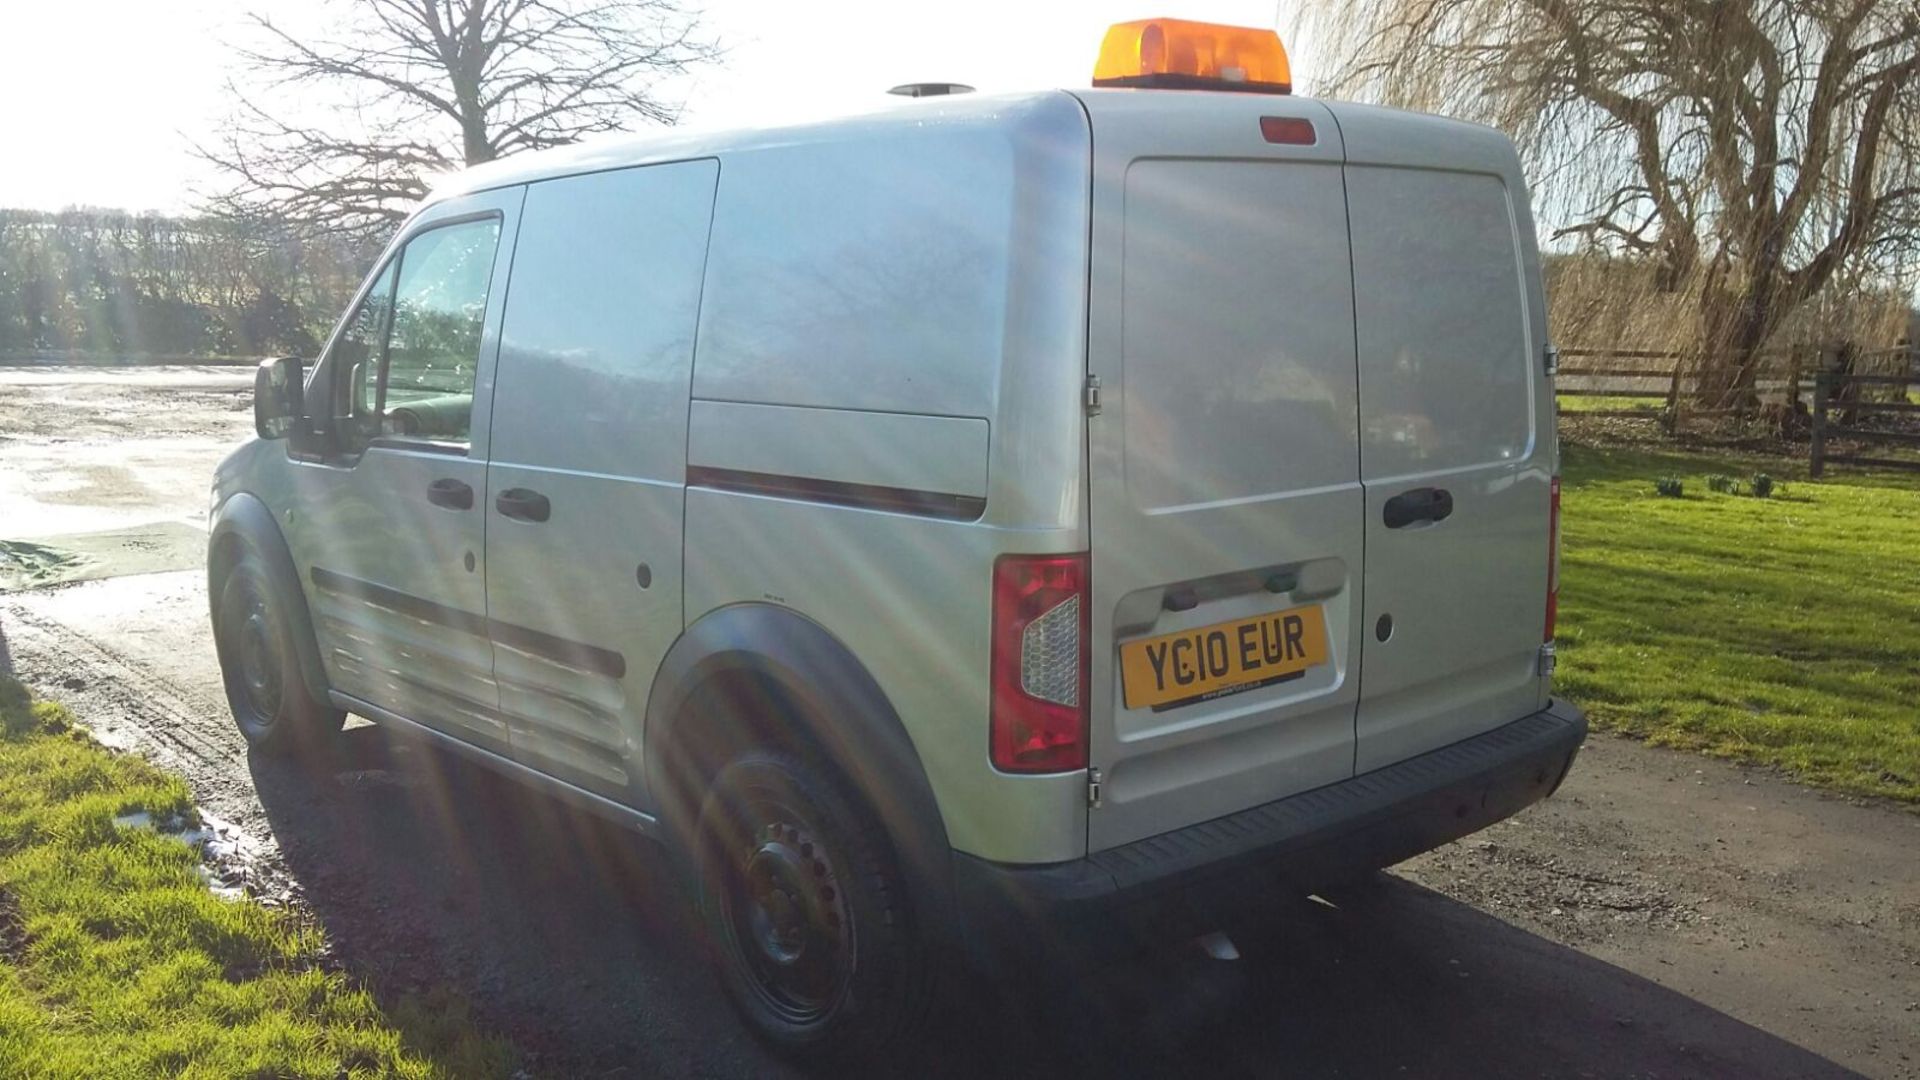 2010/10 REG FORD TRANSIT CONNECT 75 T220 1.8 DIESEL SILVER PANEL VAN, SHOWING 0 FORMER KEEPERS - Image 4 of 13